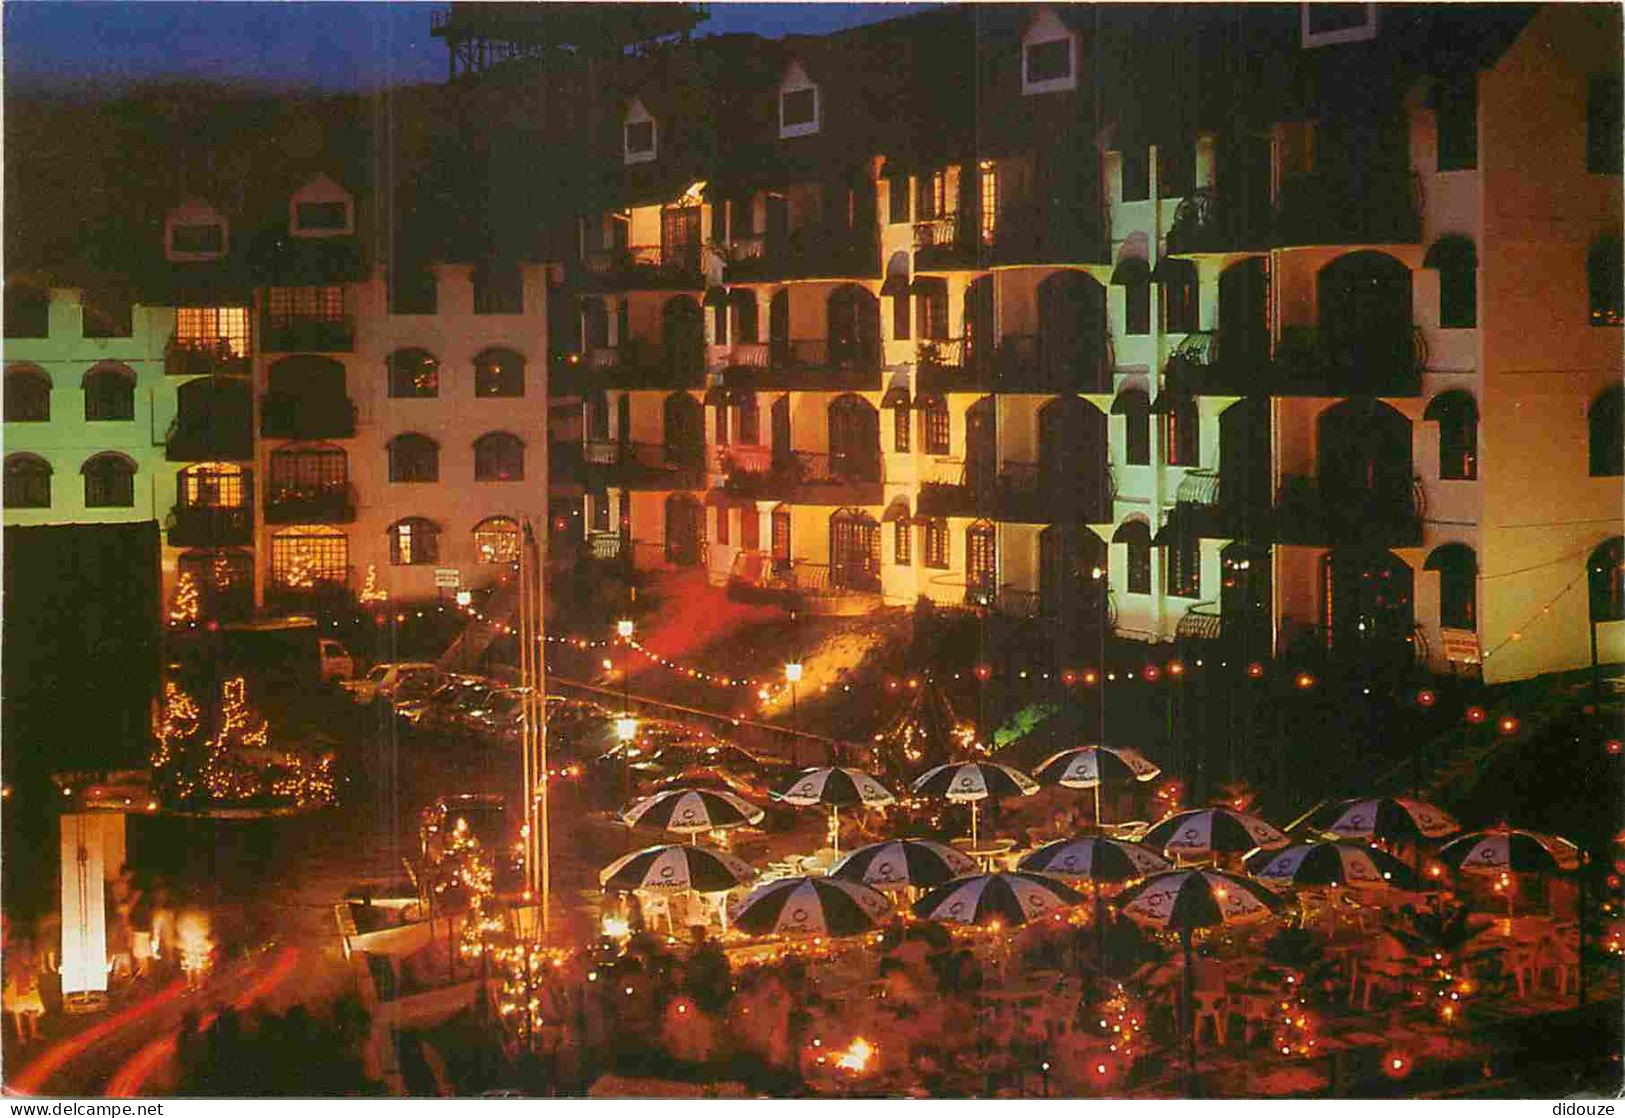 Malaisie - Brinchang - Strawberry Park Resort - Immeubles - Architecture - Malaysia - CPM - Voir Scans Recto-Verso - Malaysia